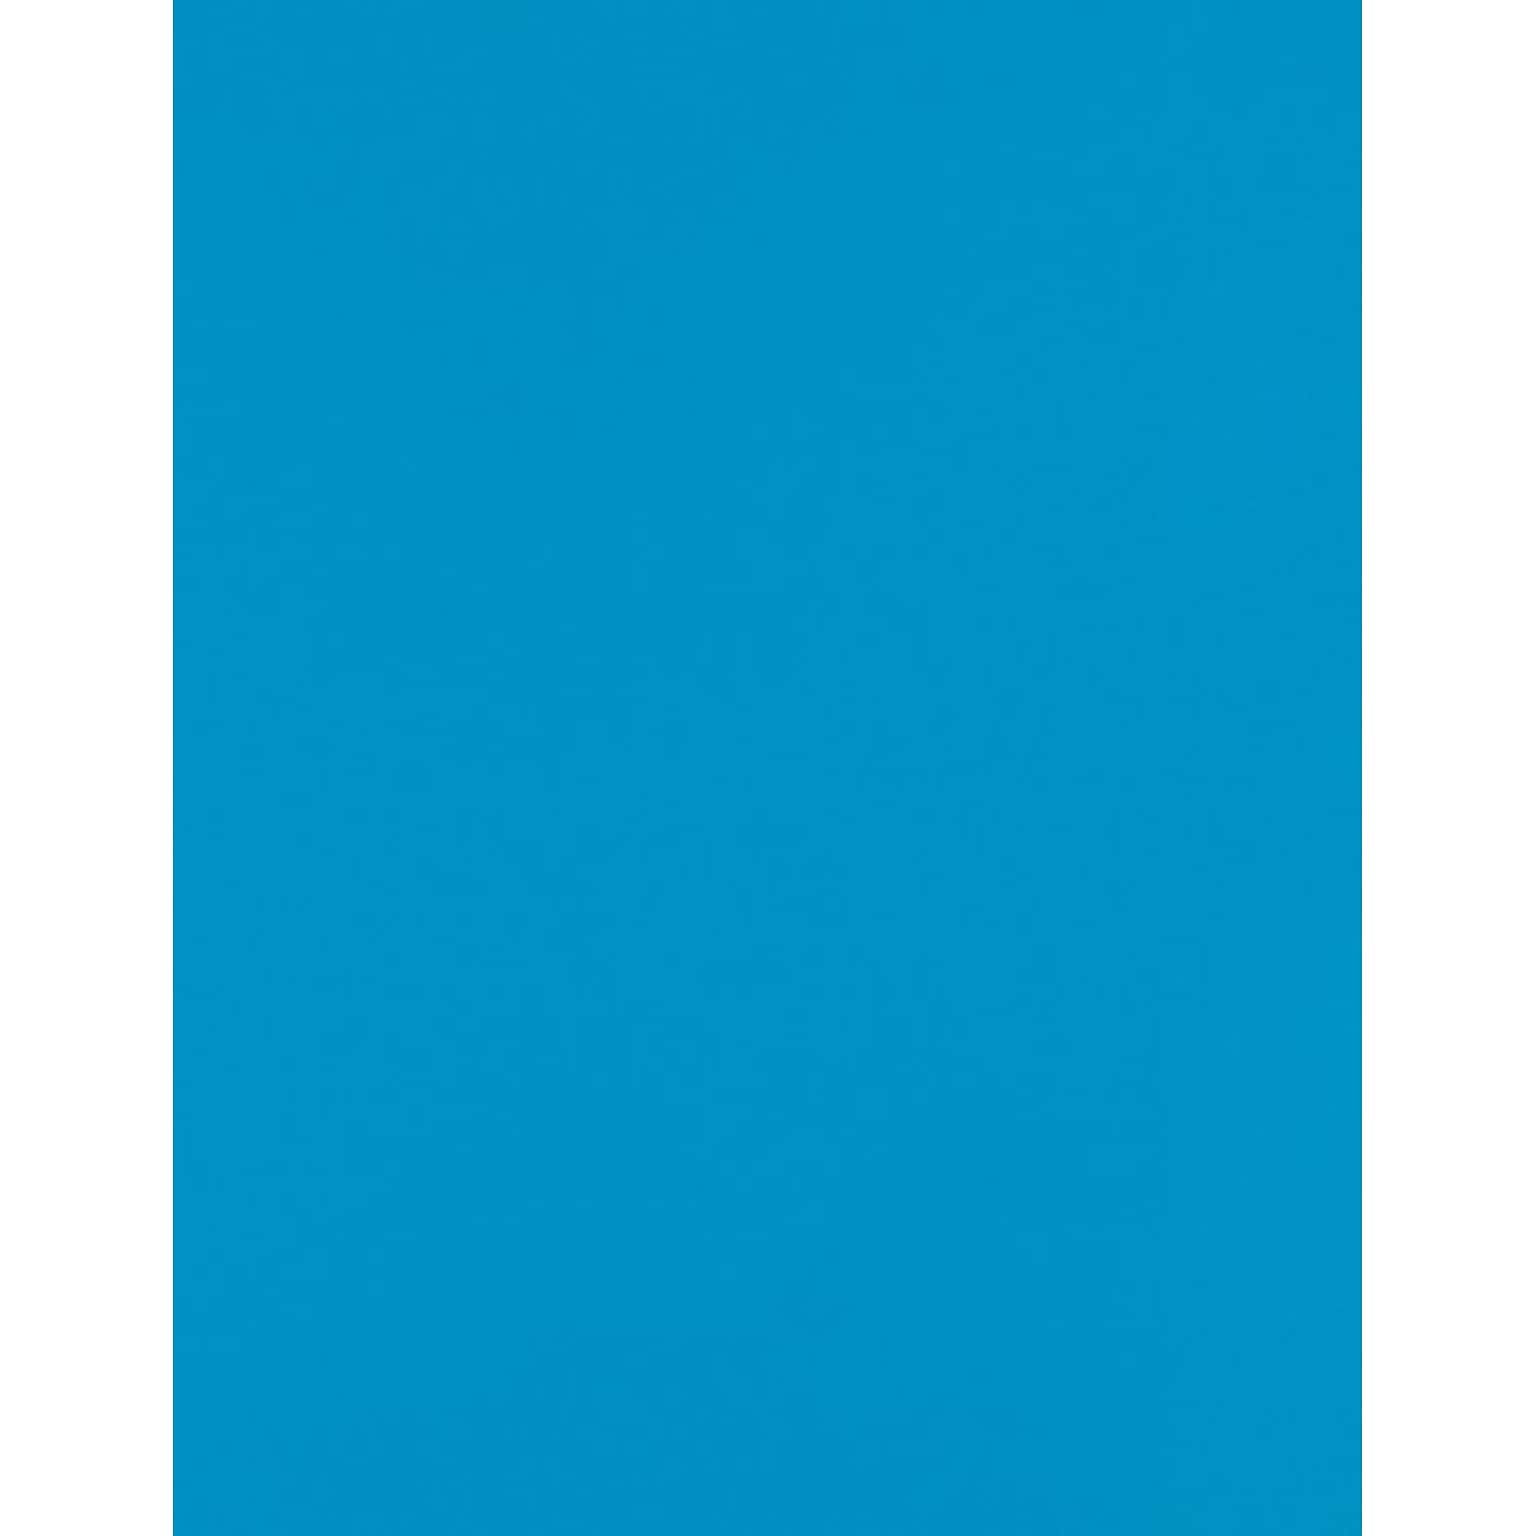 LUX 65 lb. Cardstock Paper, 8.5 x 11, Pool Blue, 500 Sheets/Pack (81211-C-198-500)